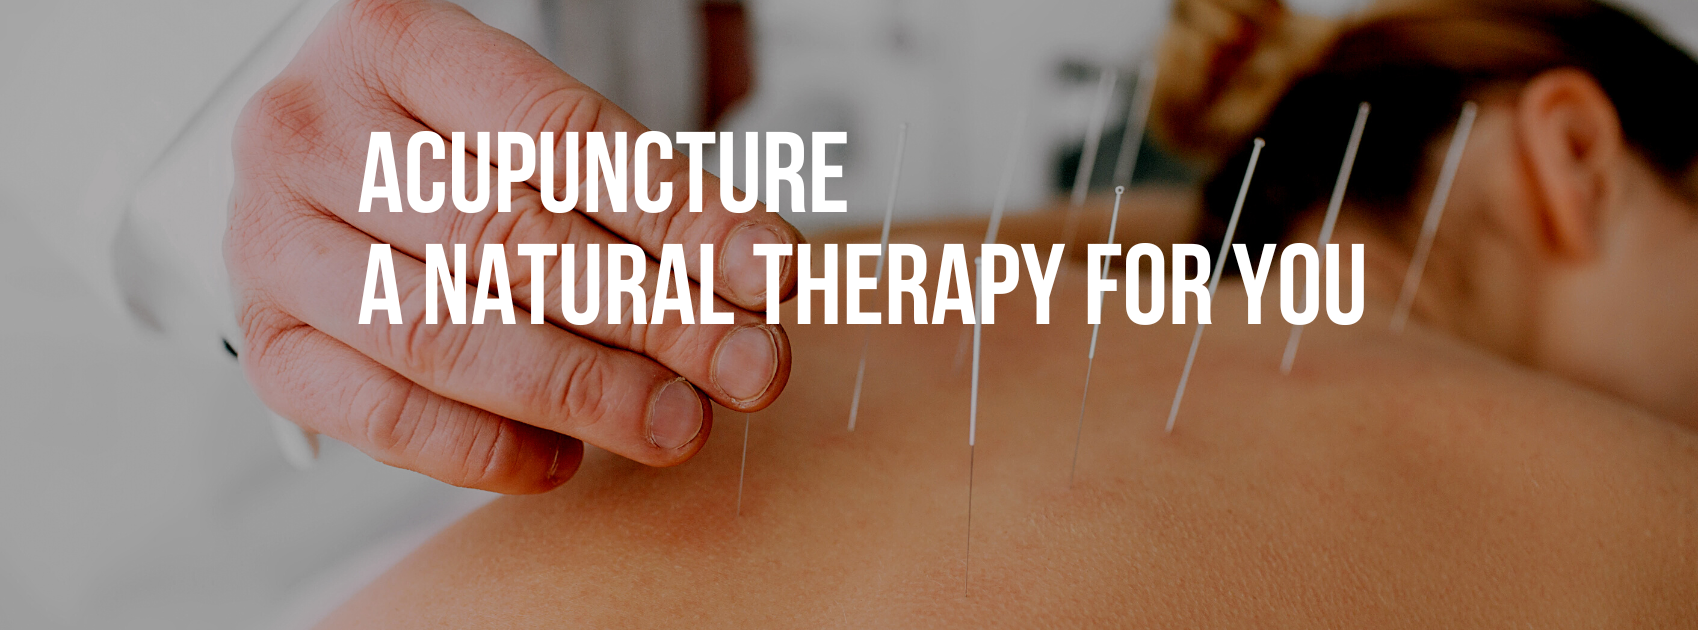 Acupuncture - A Natural Therapy For You!